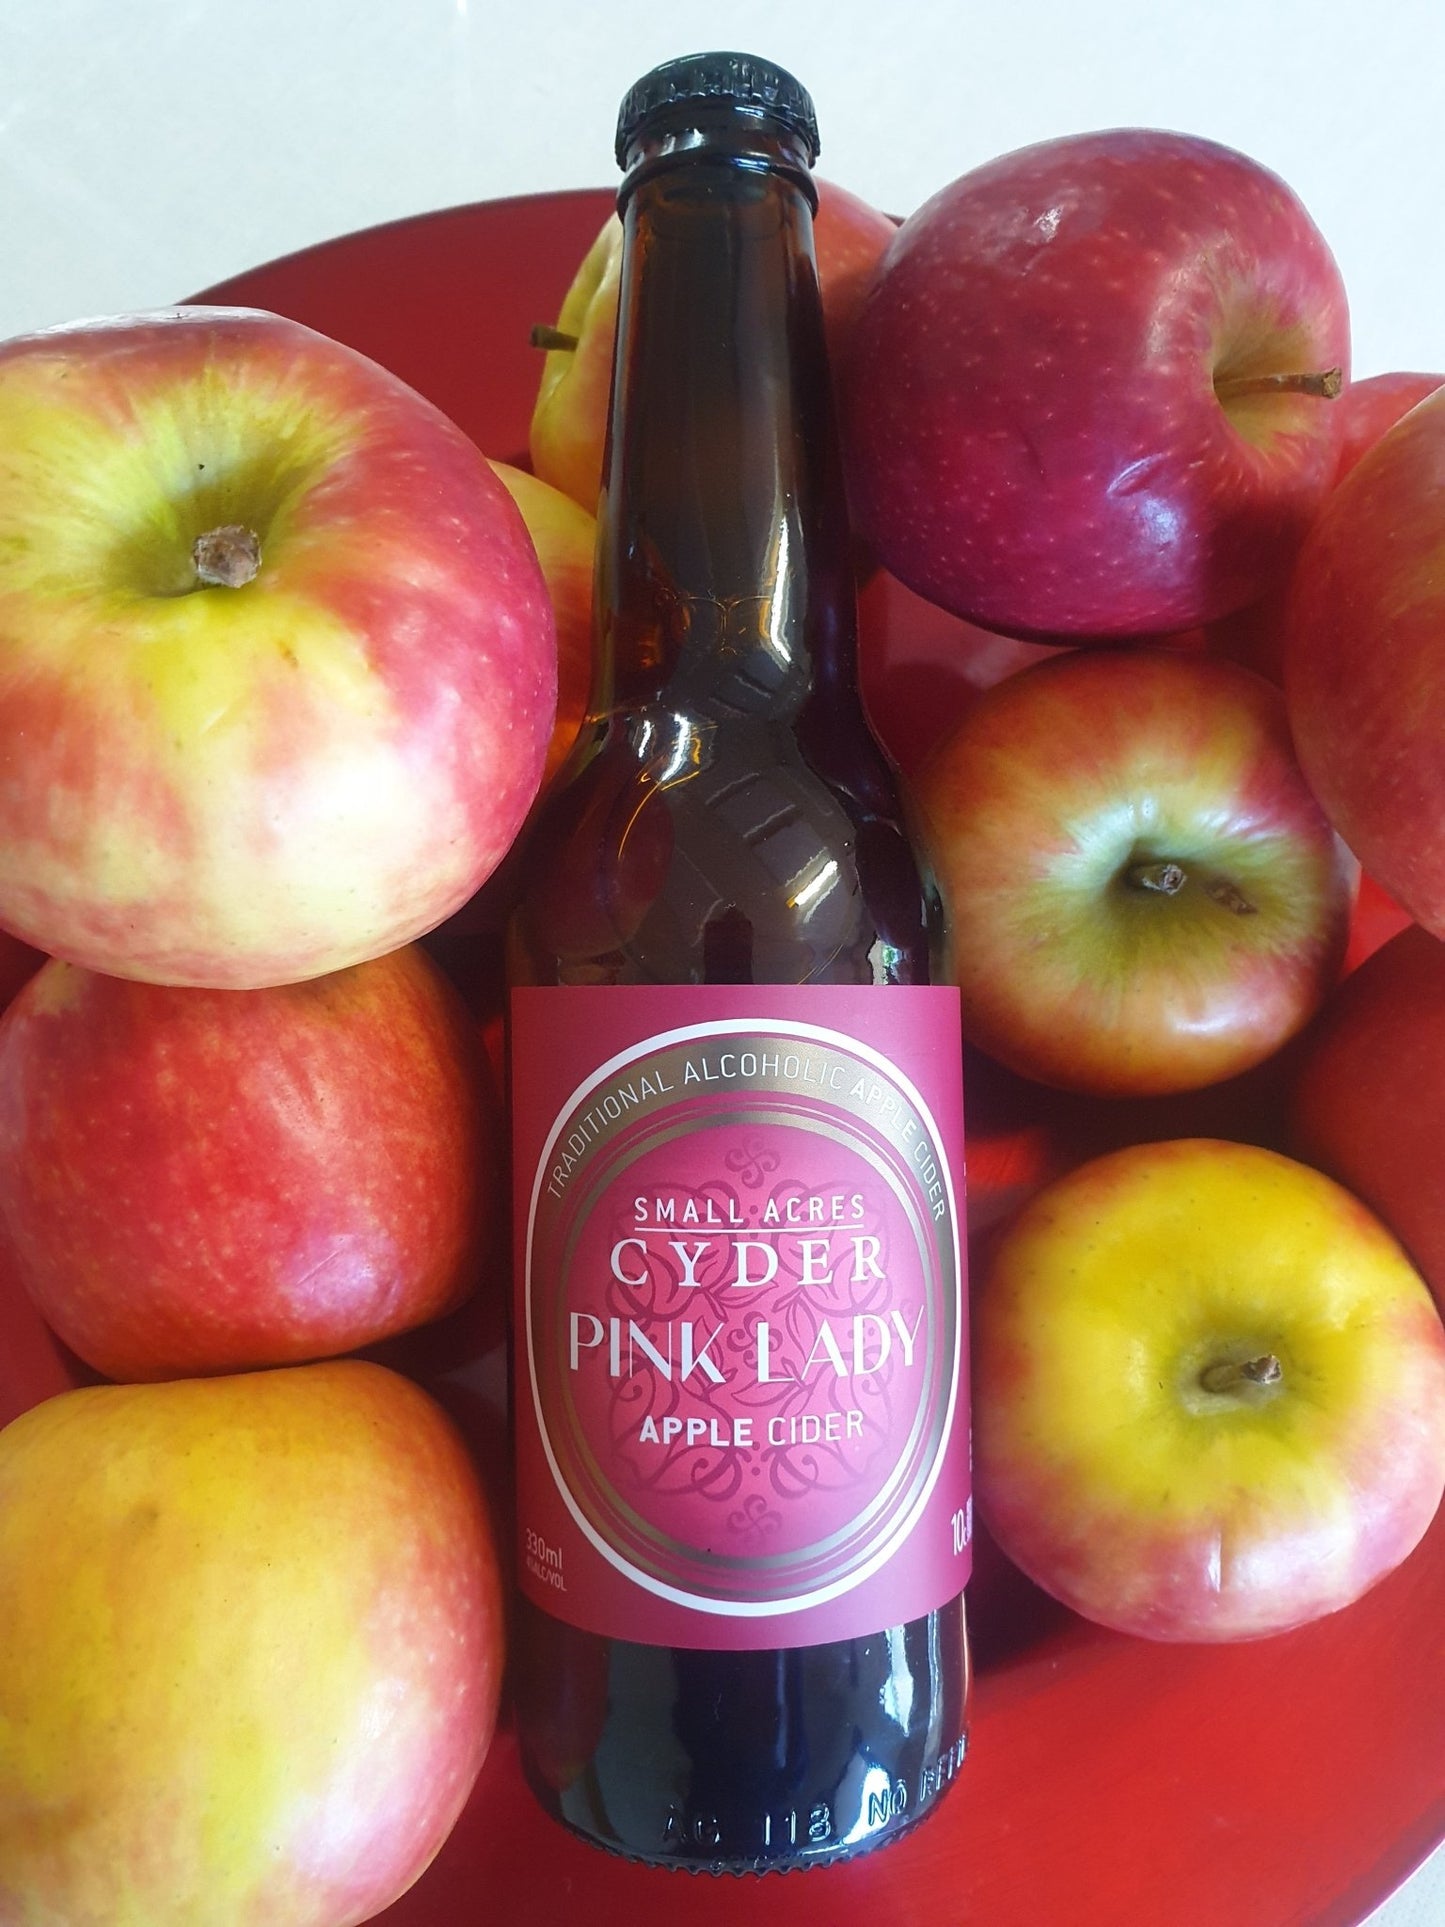 A bottle of Small Acres Cyder Pink Lady on a red plate surrounded by fresh Pink Lady apples